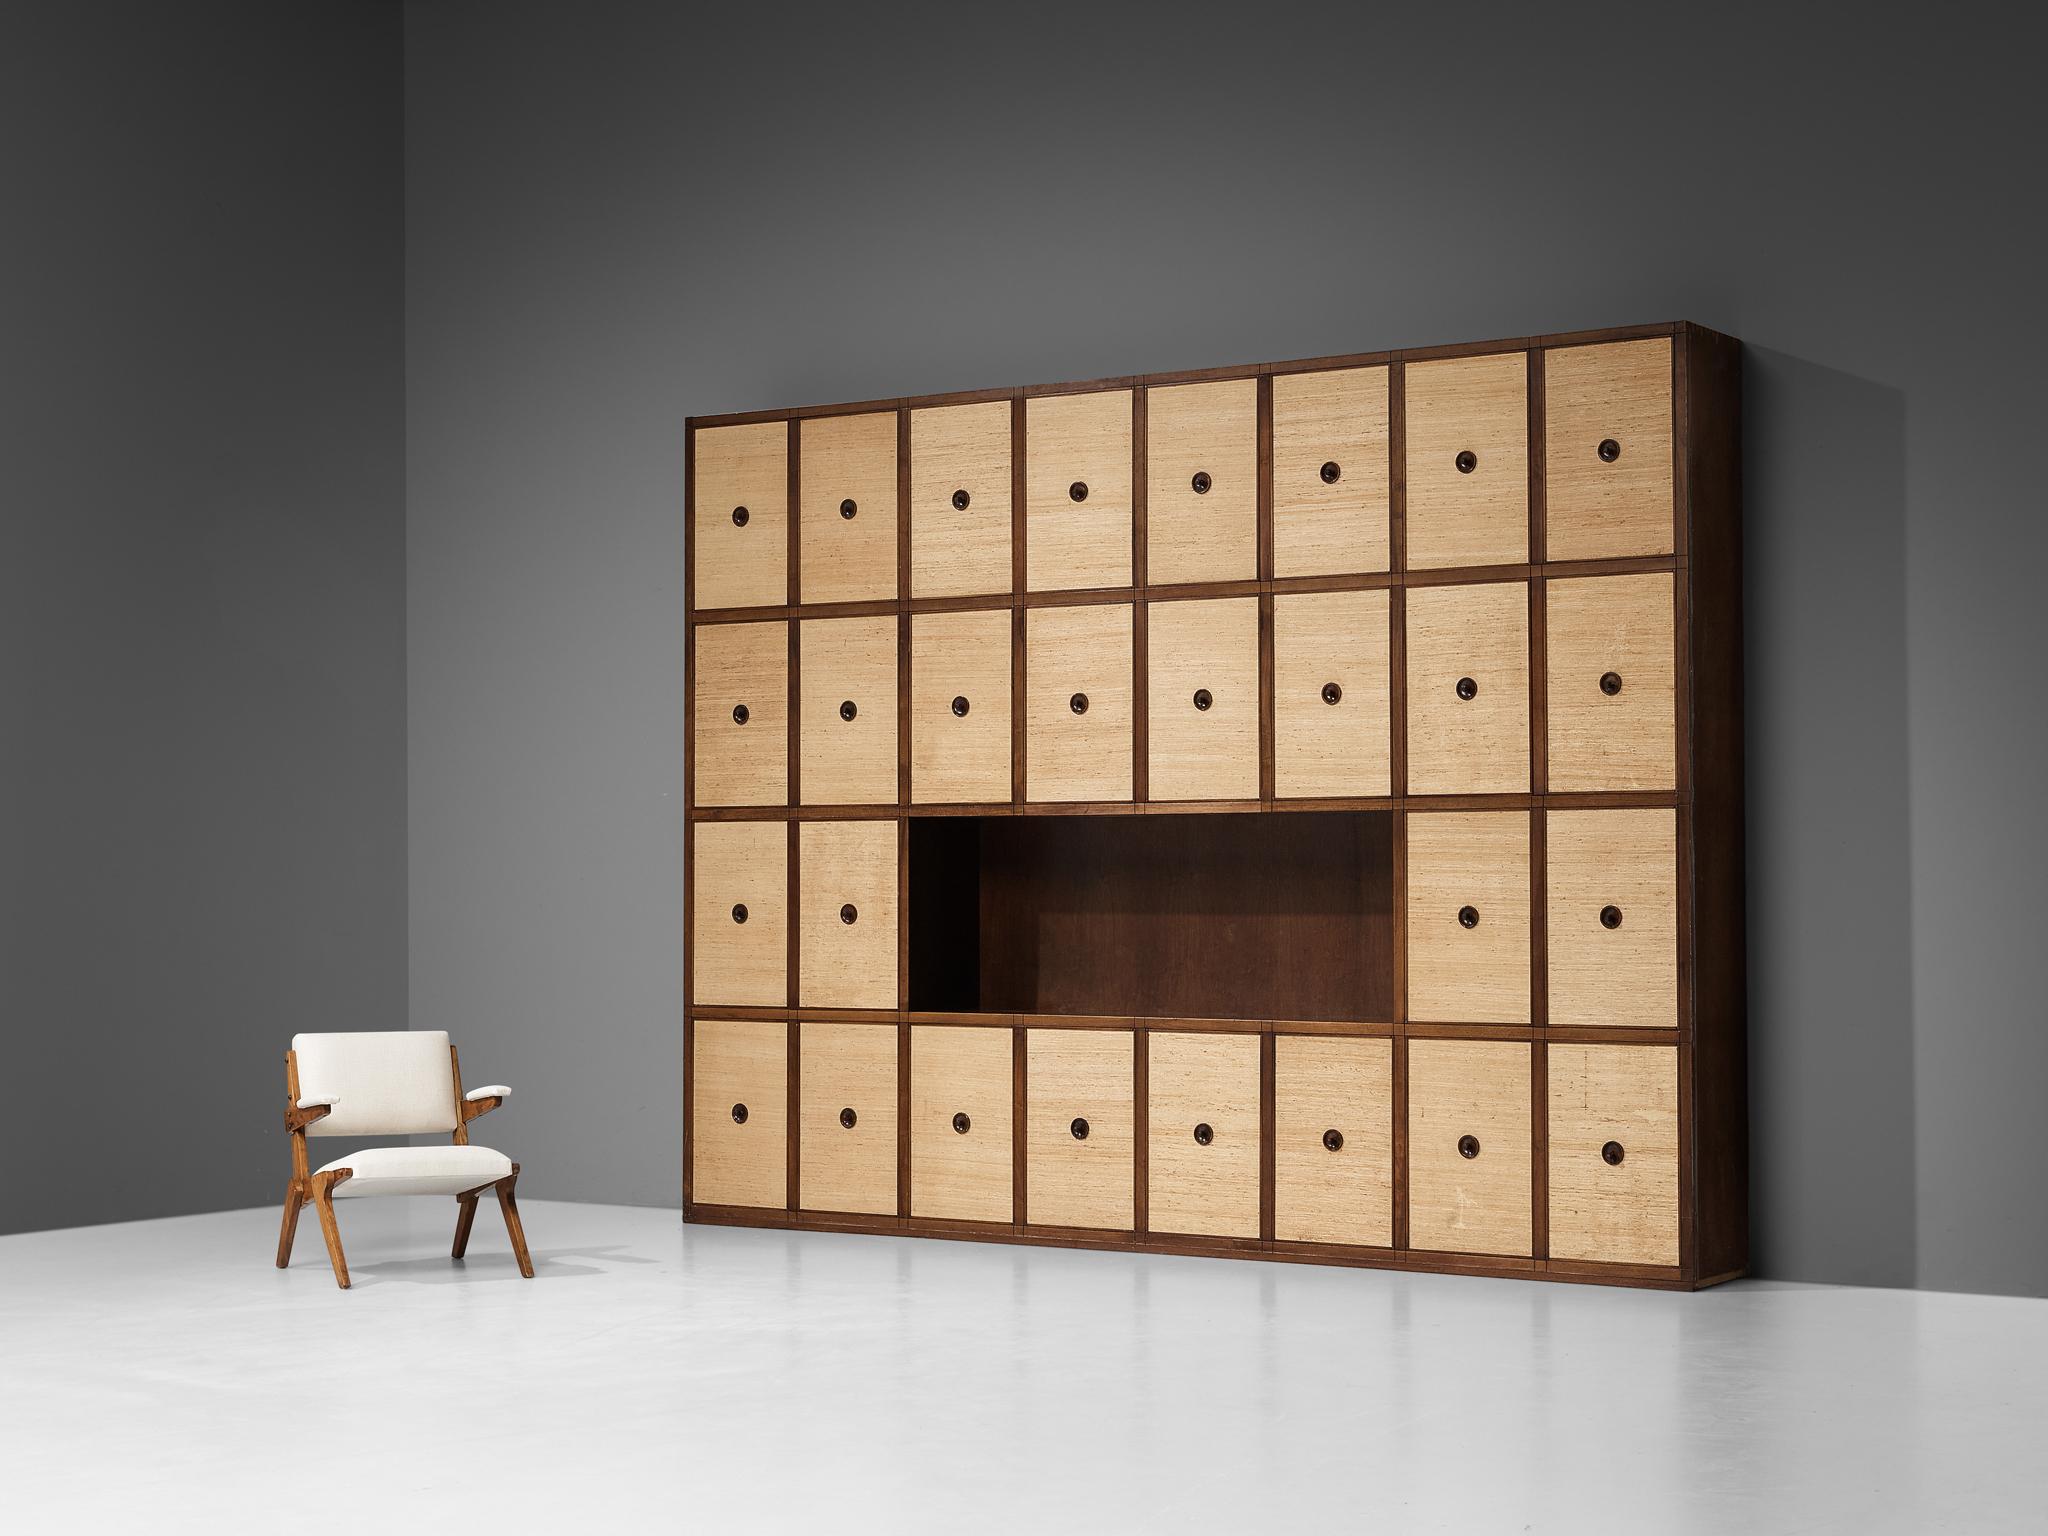 Gigi Radice for Studio Gino Colombo, custom made wall unit, walnut, seagrass, Italy, 1950s. 

Impressive custom-made large cabinet designed by Italian designer Gigi Radice in the 1950s. Equipped with 28 doors, this sizeable cabinet offers plenty of